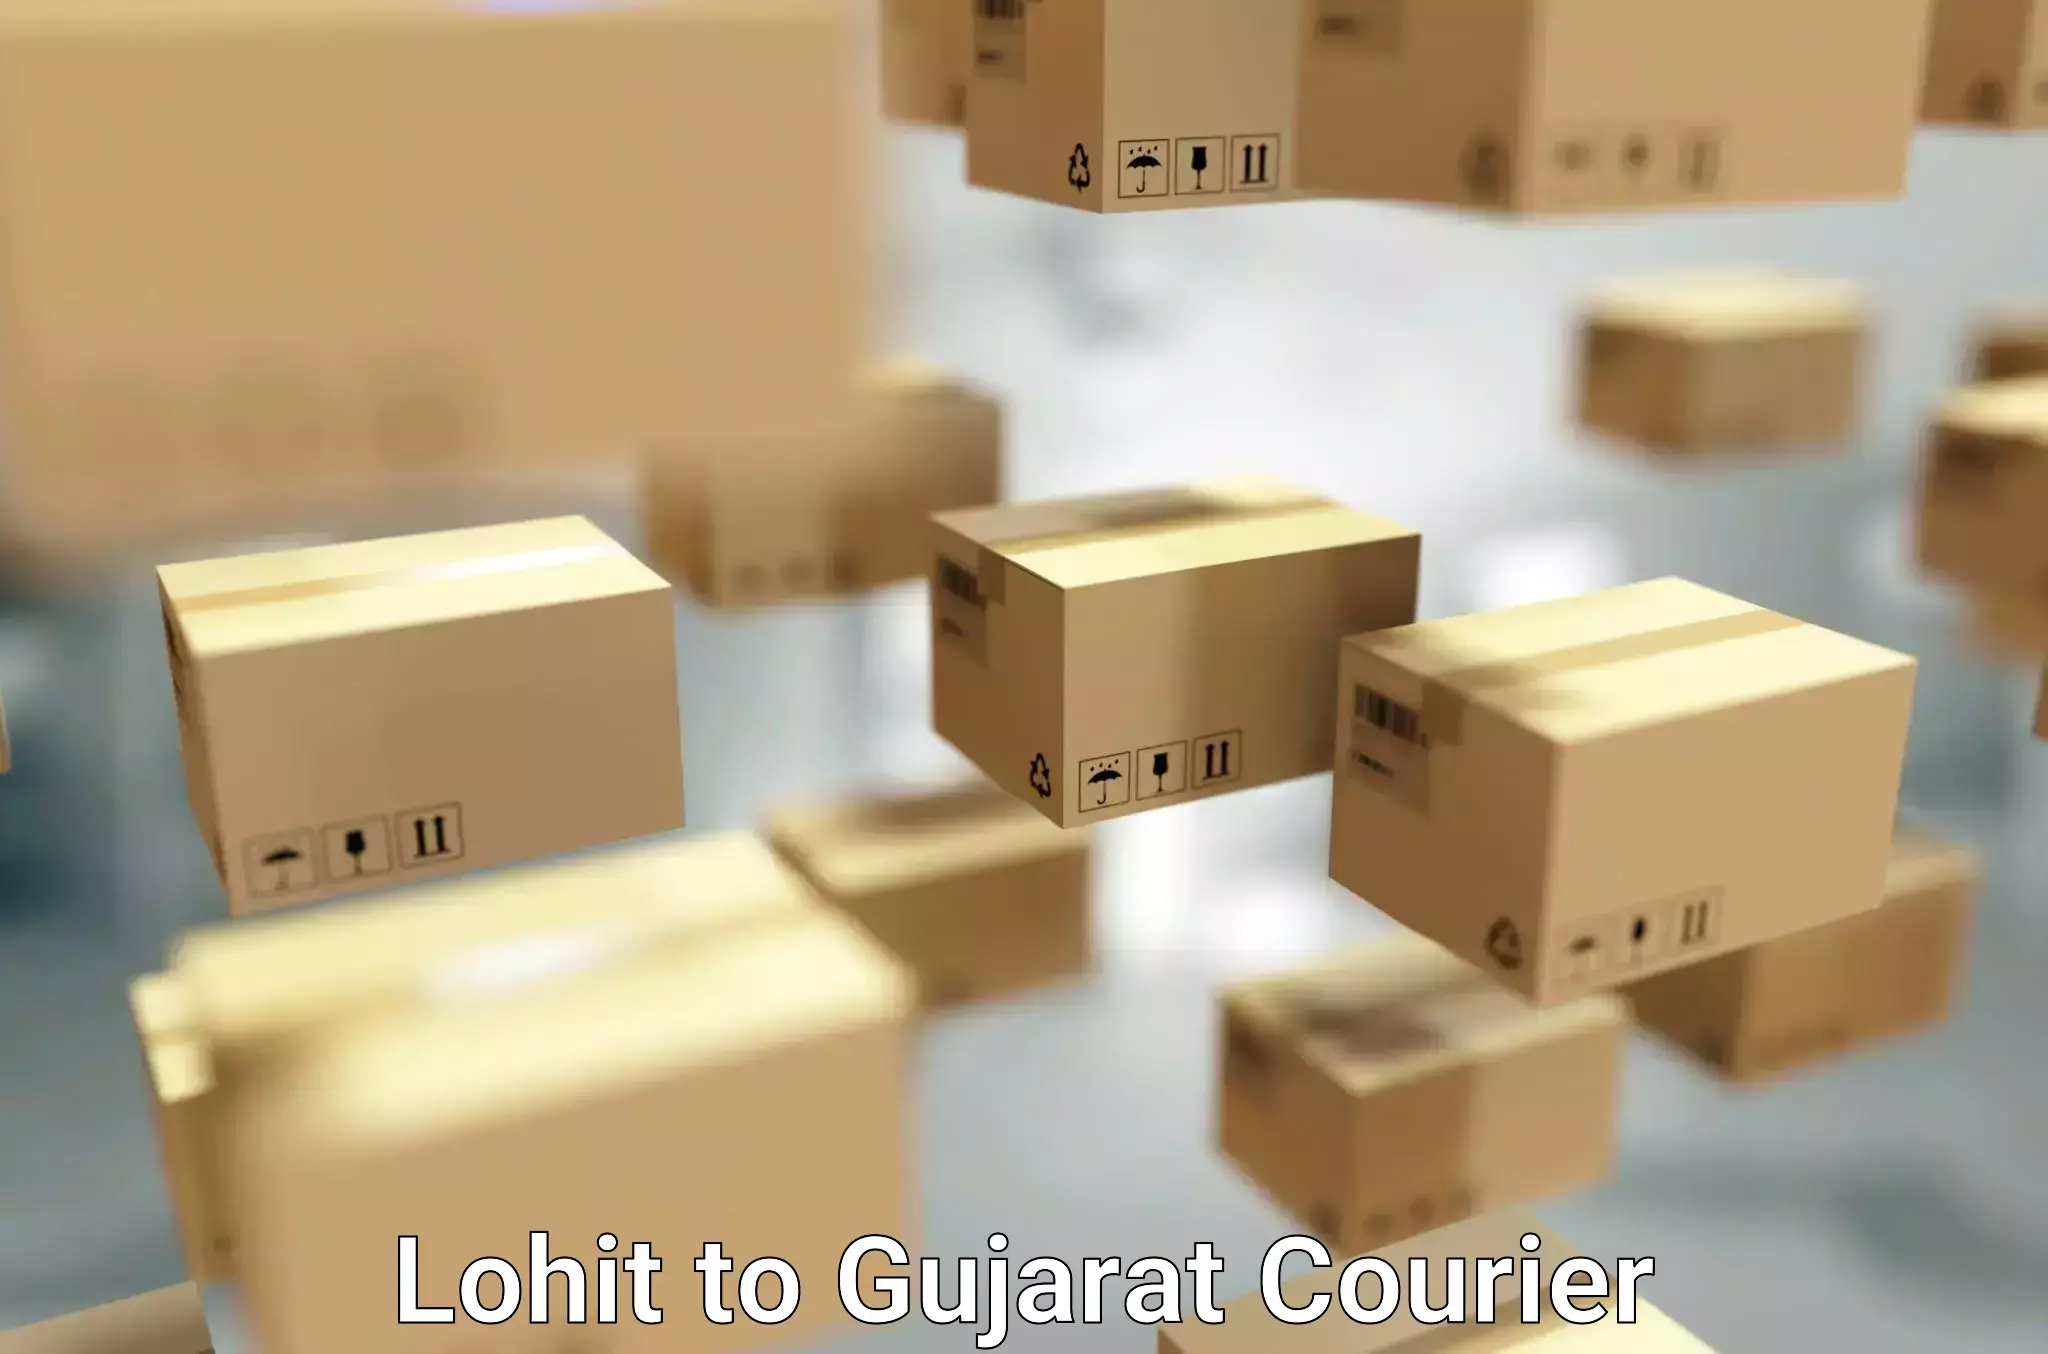 Furniture moving specialists Lohit to Vagara